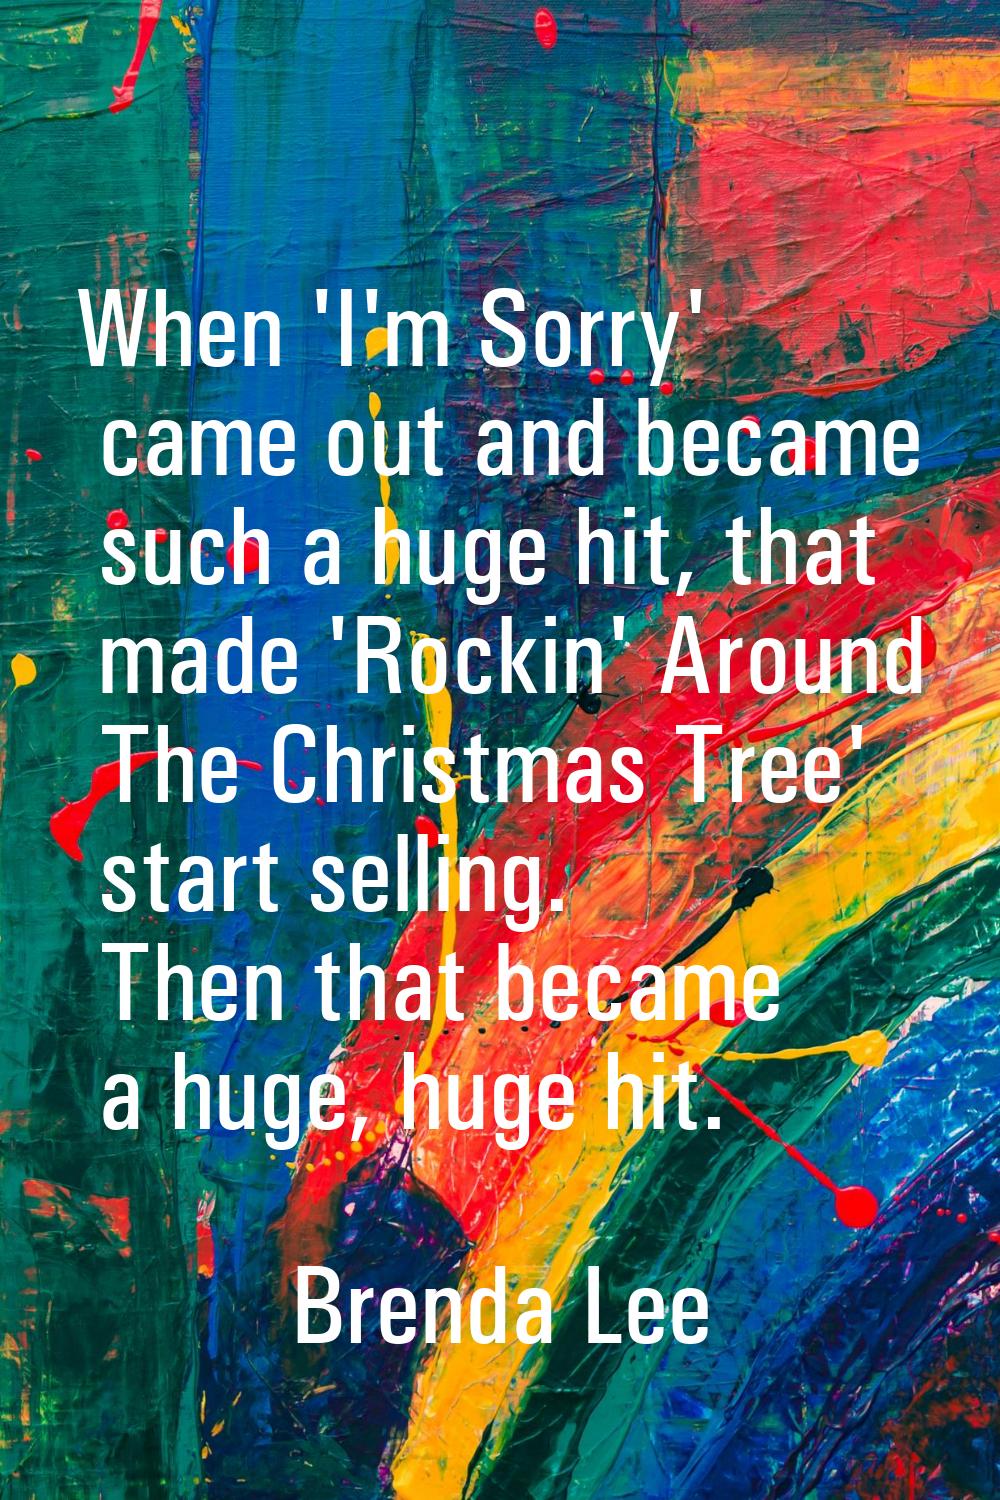 When 'I'm Sorry' came out and became such a huge hit, that made 'Rockin' Around The Christmas Tree'